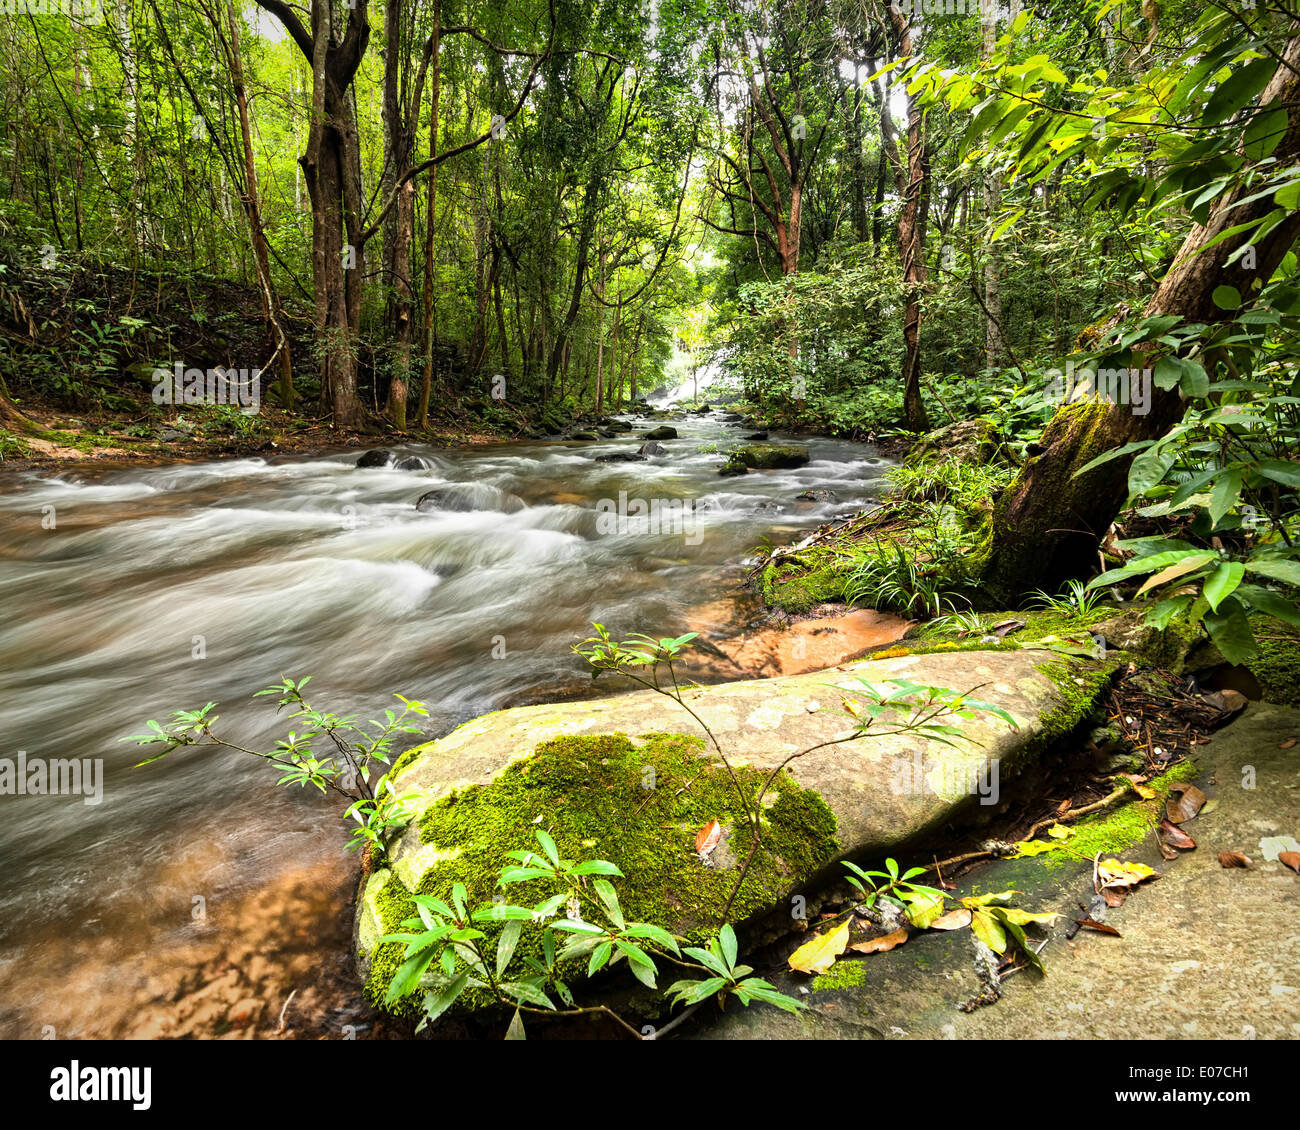 Tropical rainforest landscape with flowing river, rocks and jungle plants. Thailand Stock Photo